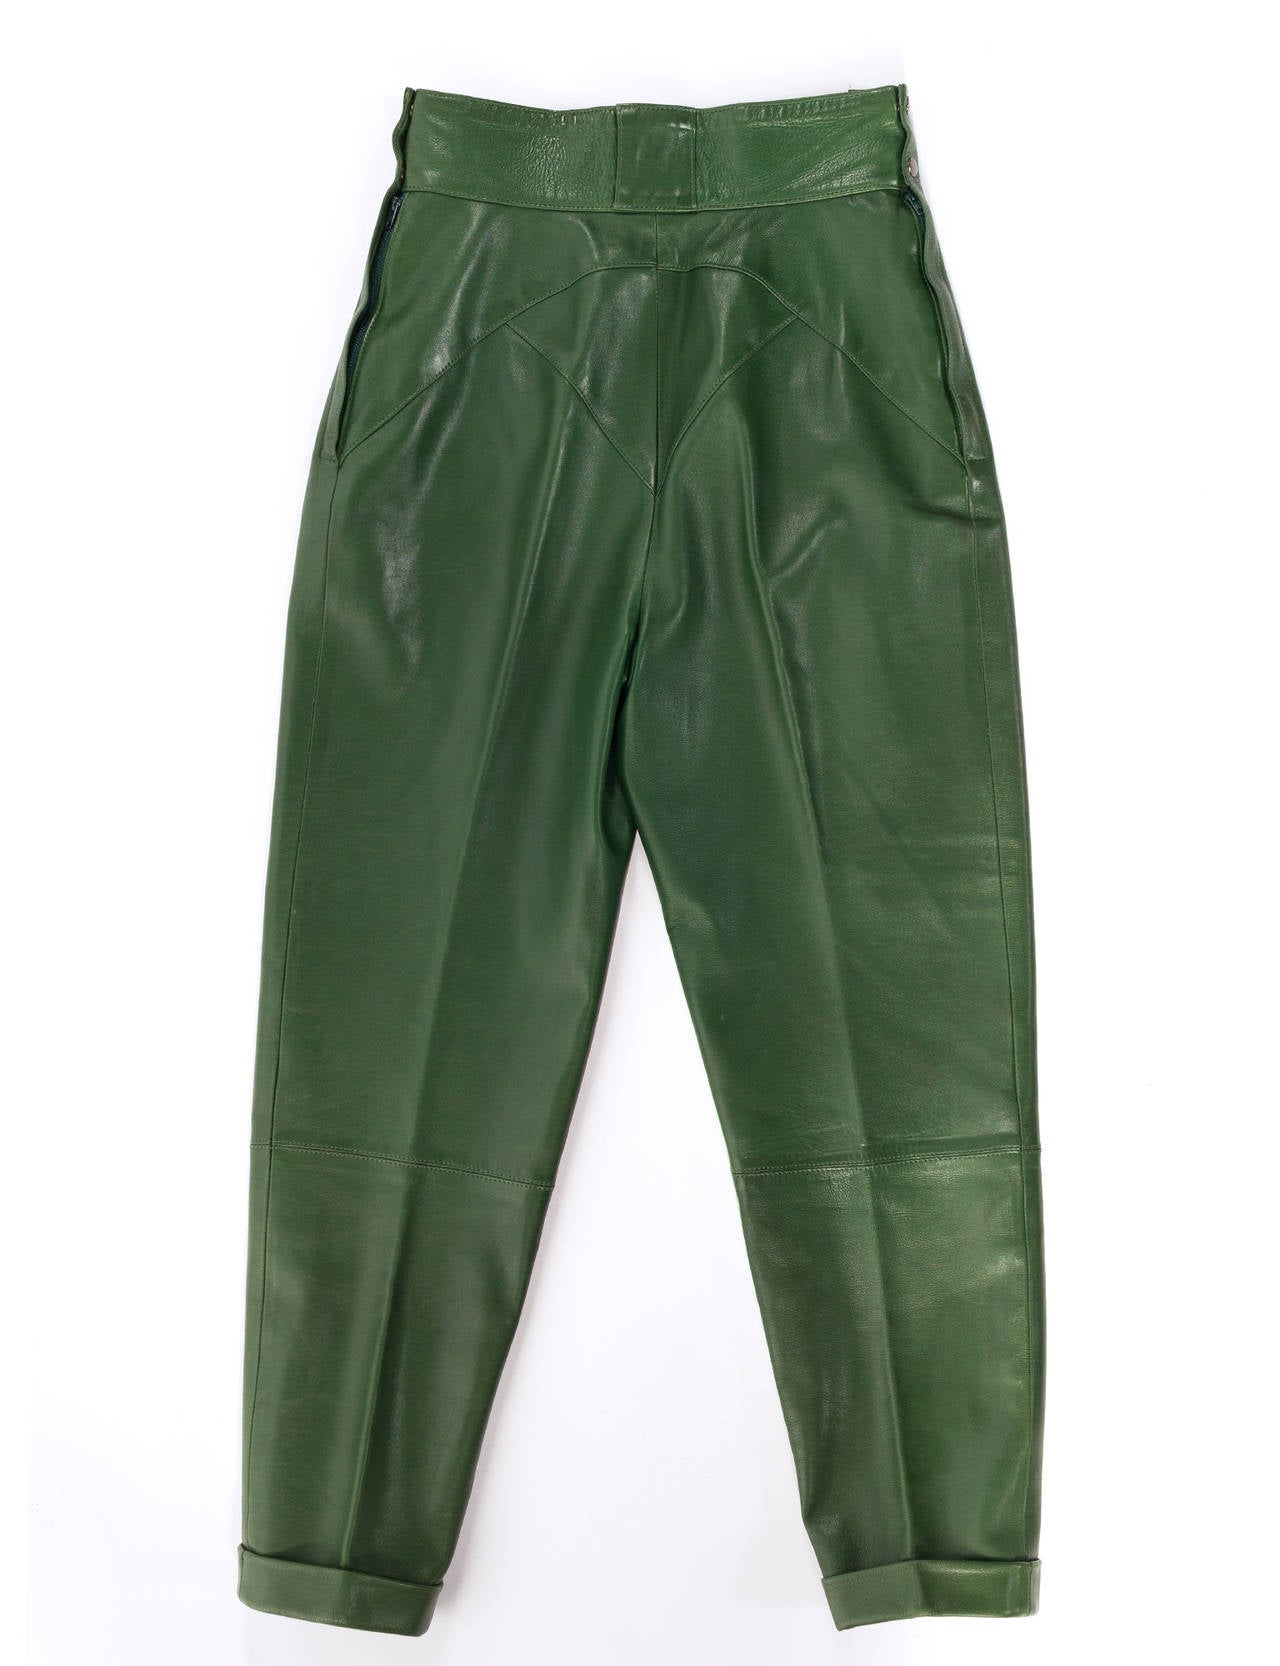 Azzendine Alaia green leather fitted trousers, with fitted waist band, front pleats side closure, Soft bottle green leather as only Alaia can do. The inside pocket lining has been damaged from use, can be repaired by professional tailor. Size French